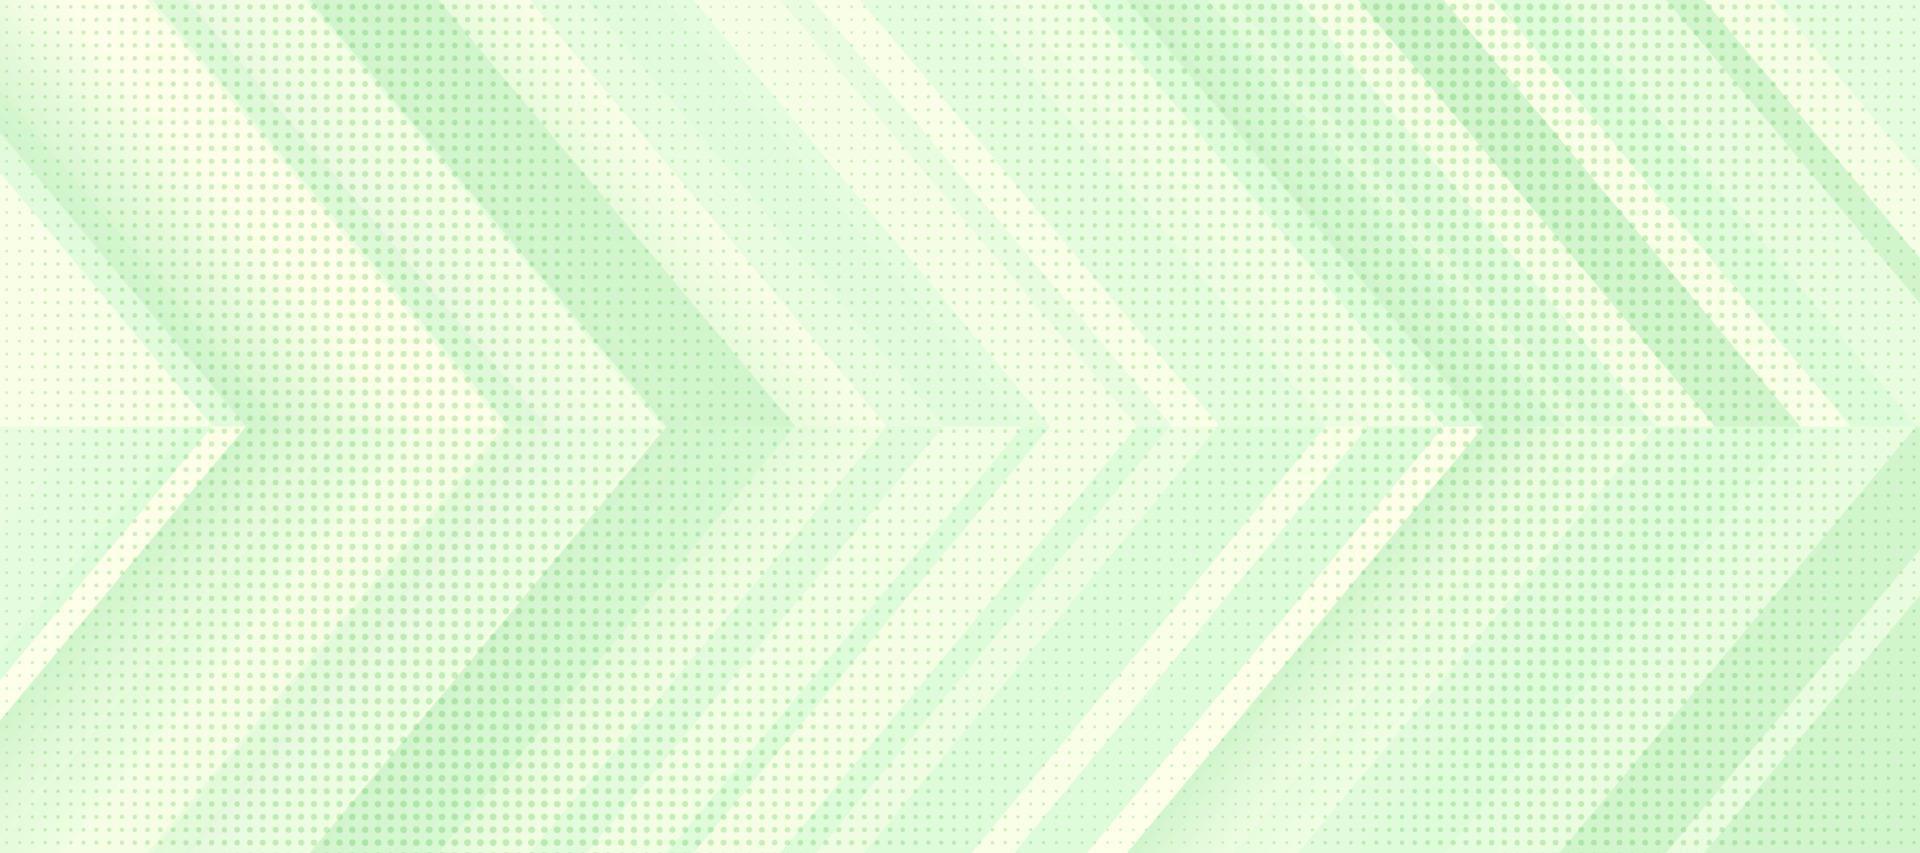 Modern and minimal pastel color geometric shape banner design.  Halftone dotted pattern decoration. Light green angle arrow overlapping layered abstract background. Vector illustration